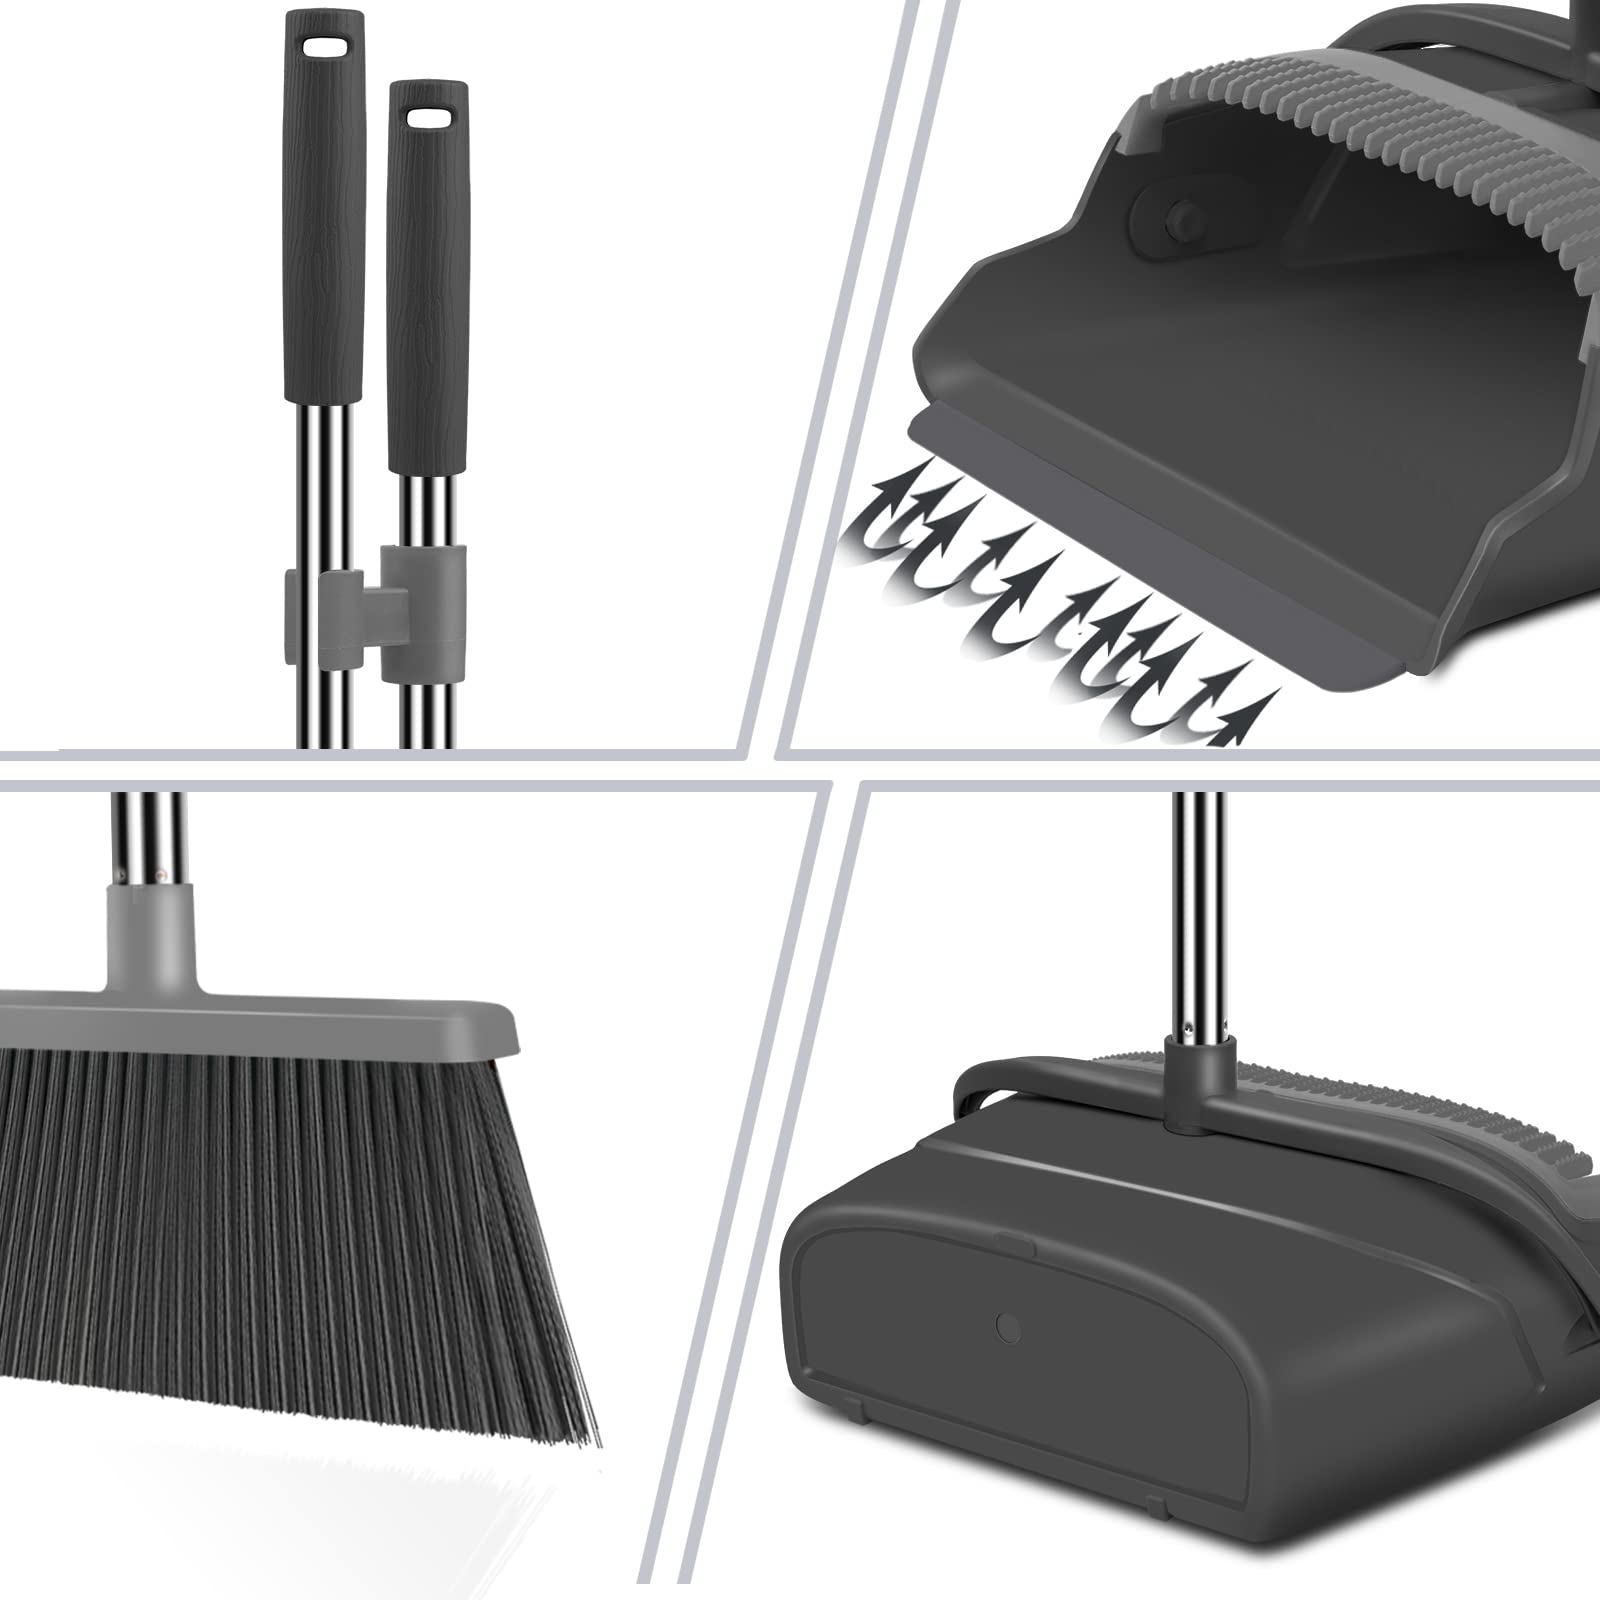 kelamayi Broom and Dustpan Set for Home, Office, Indoor&Outdoor Sweeping, Stand Up Broom and Dustpan (Black&Gray)